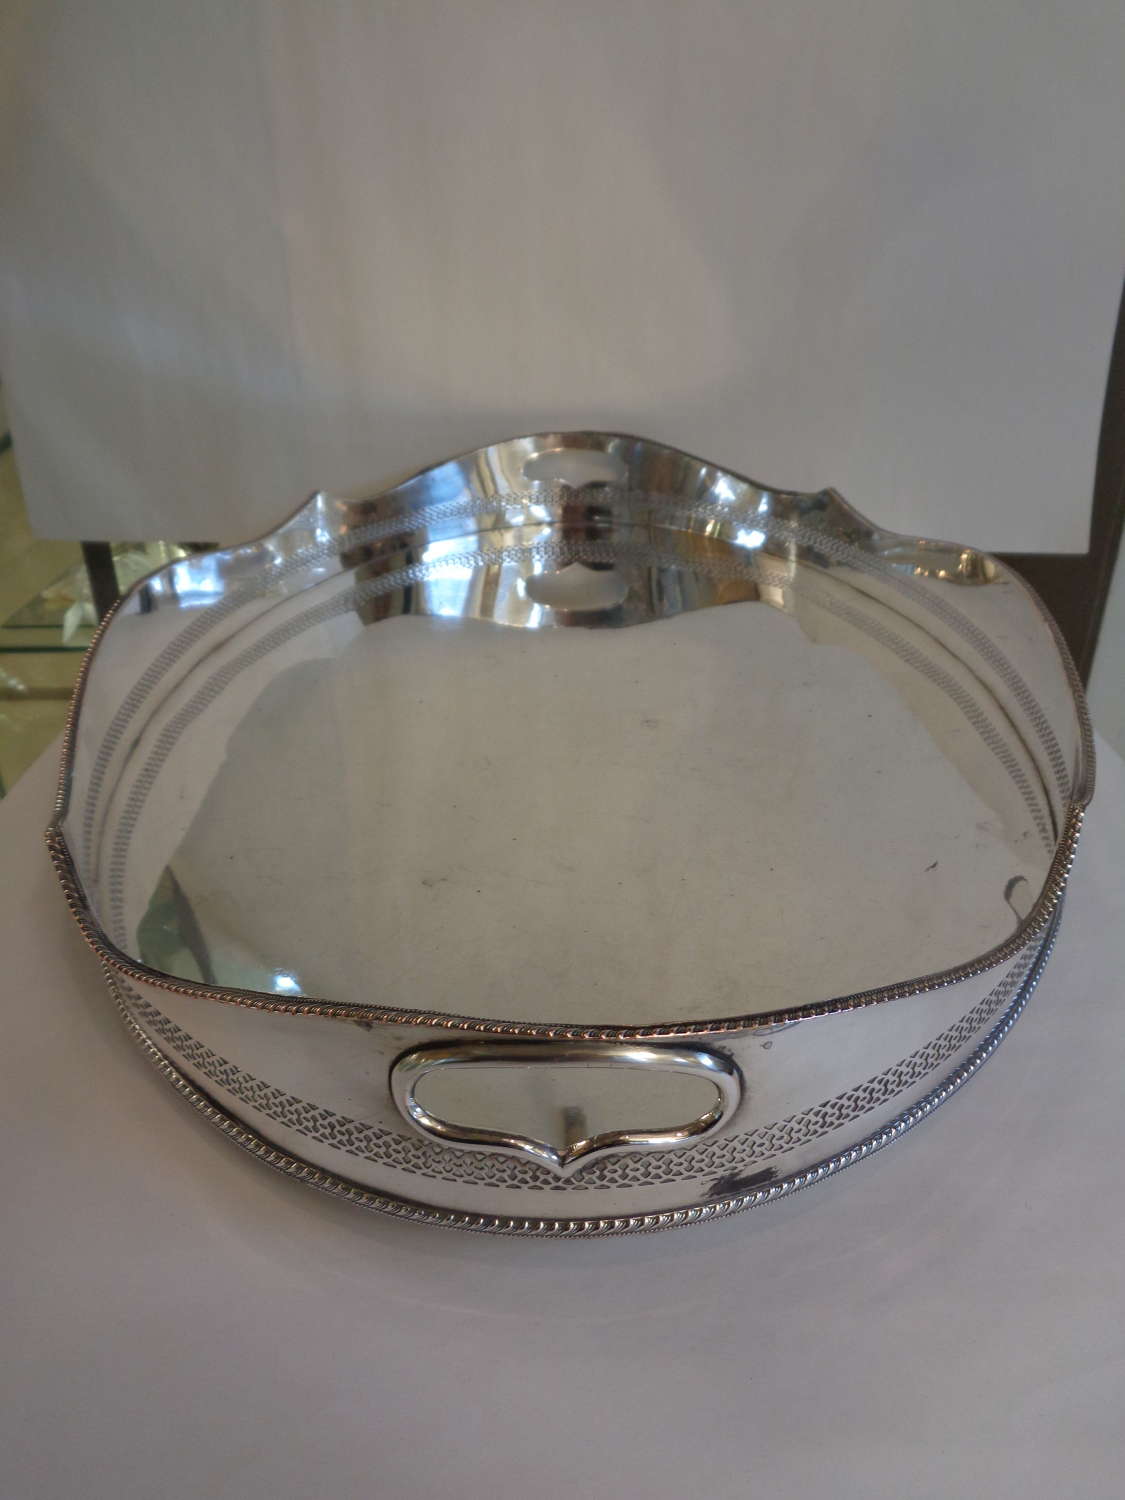 Antique Silver Plate Galleried Butlers Tray - Very Large